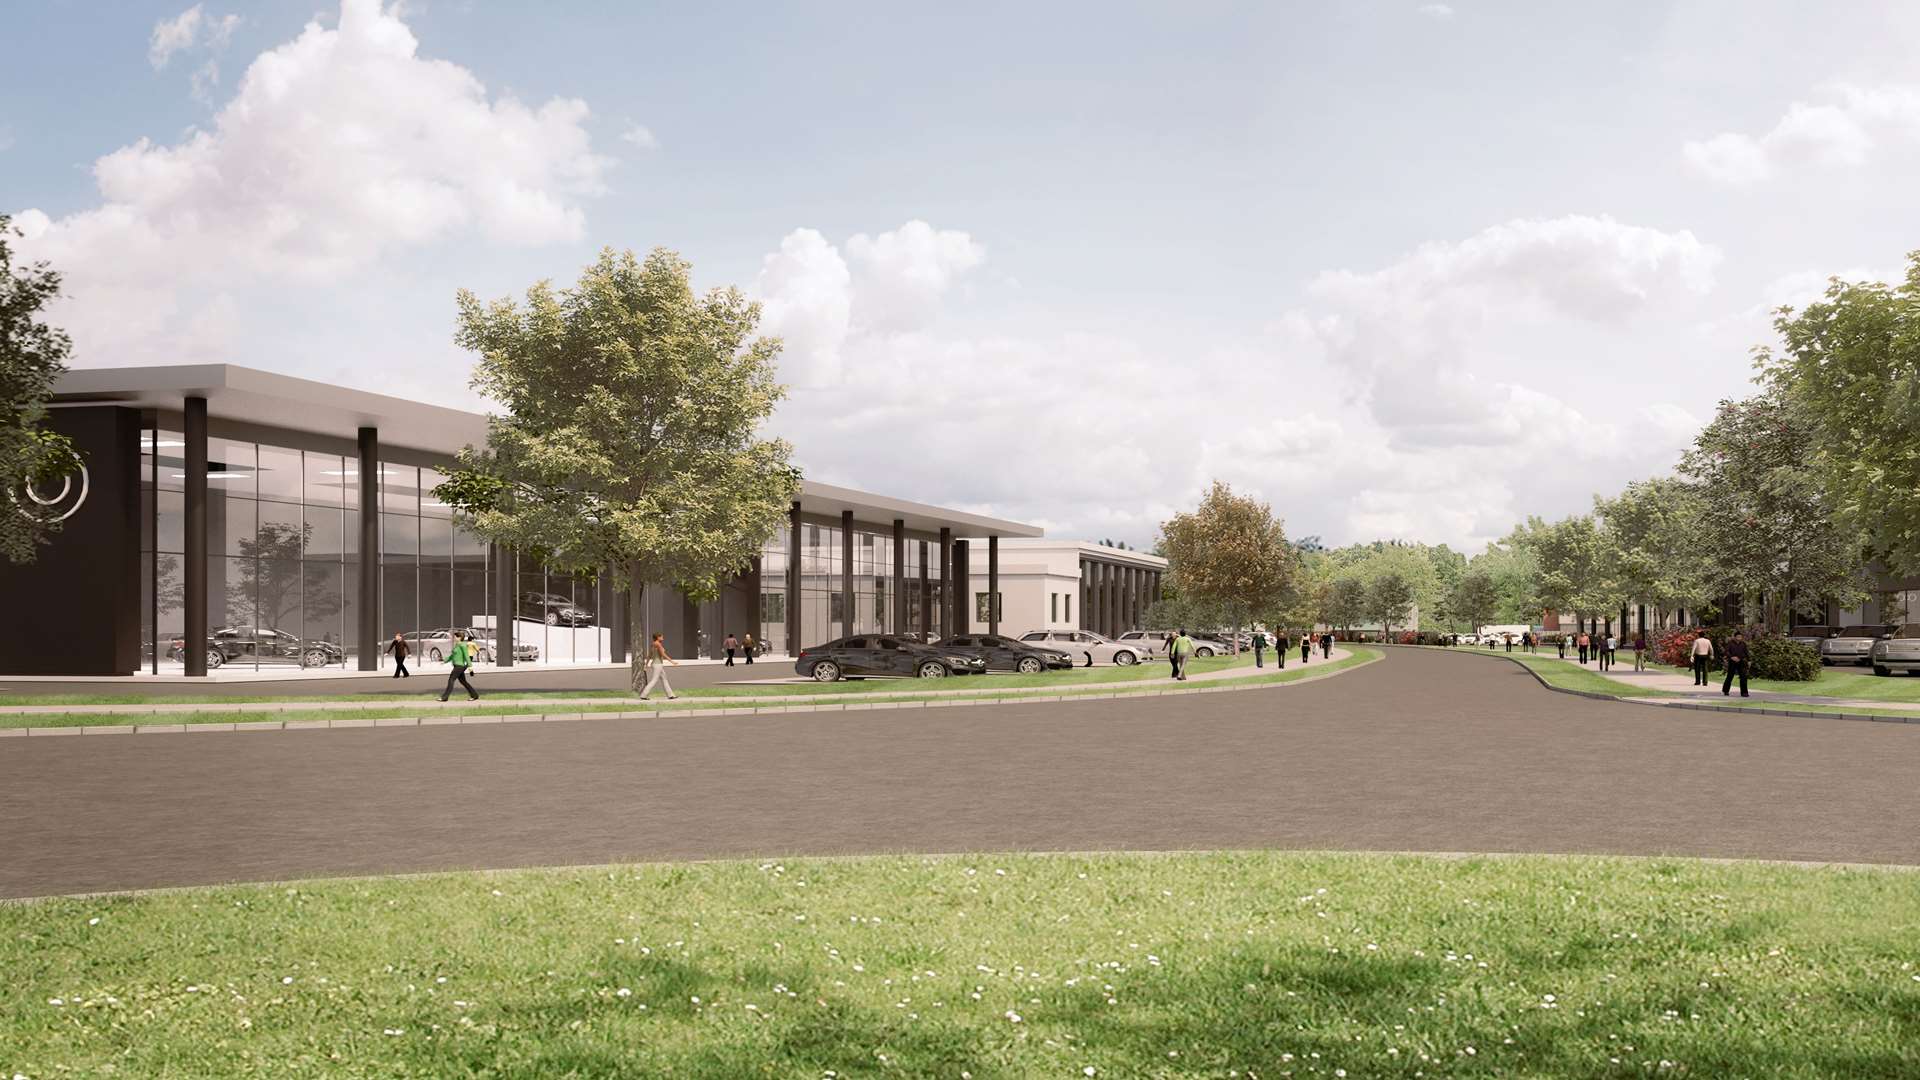 The commercial space proposed at Waterbrook Park